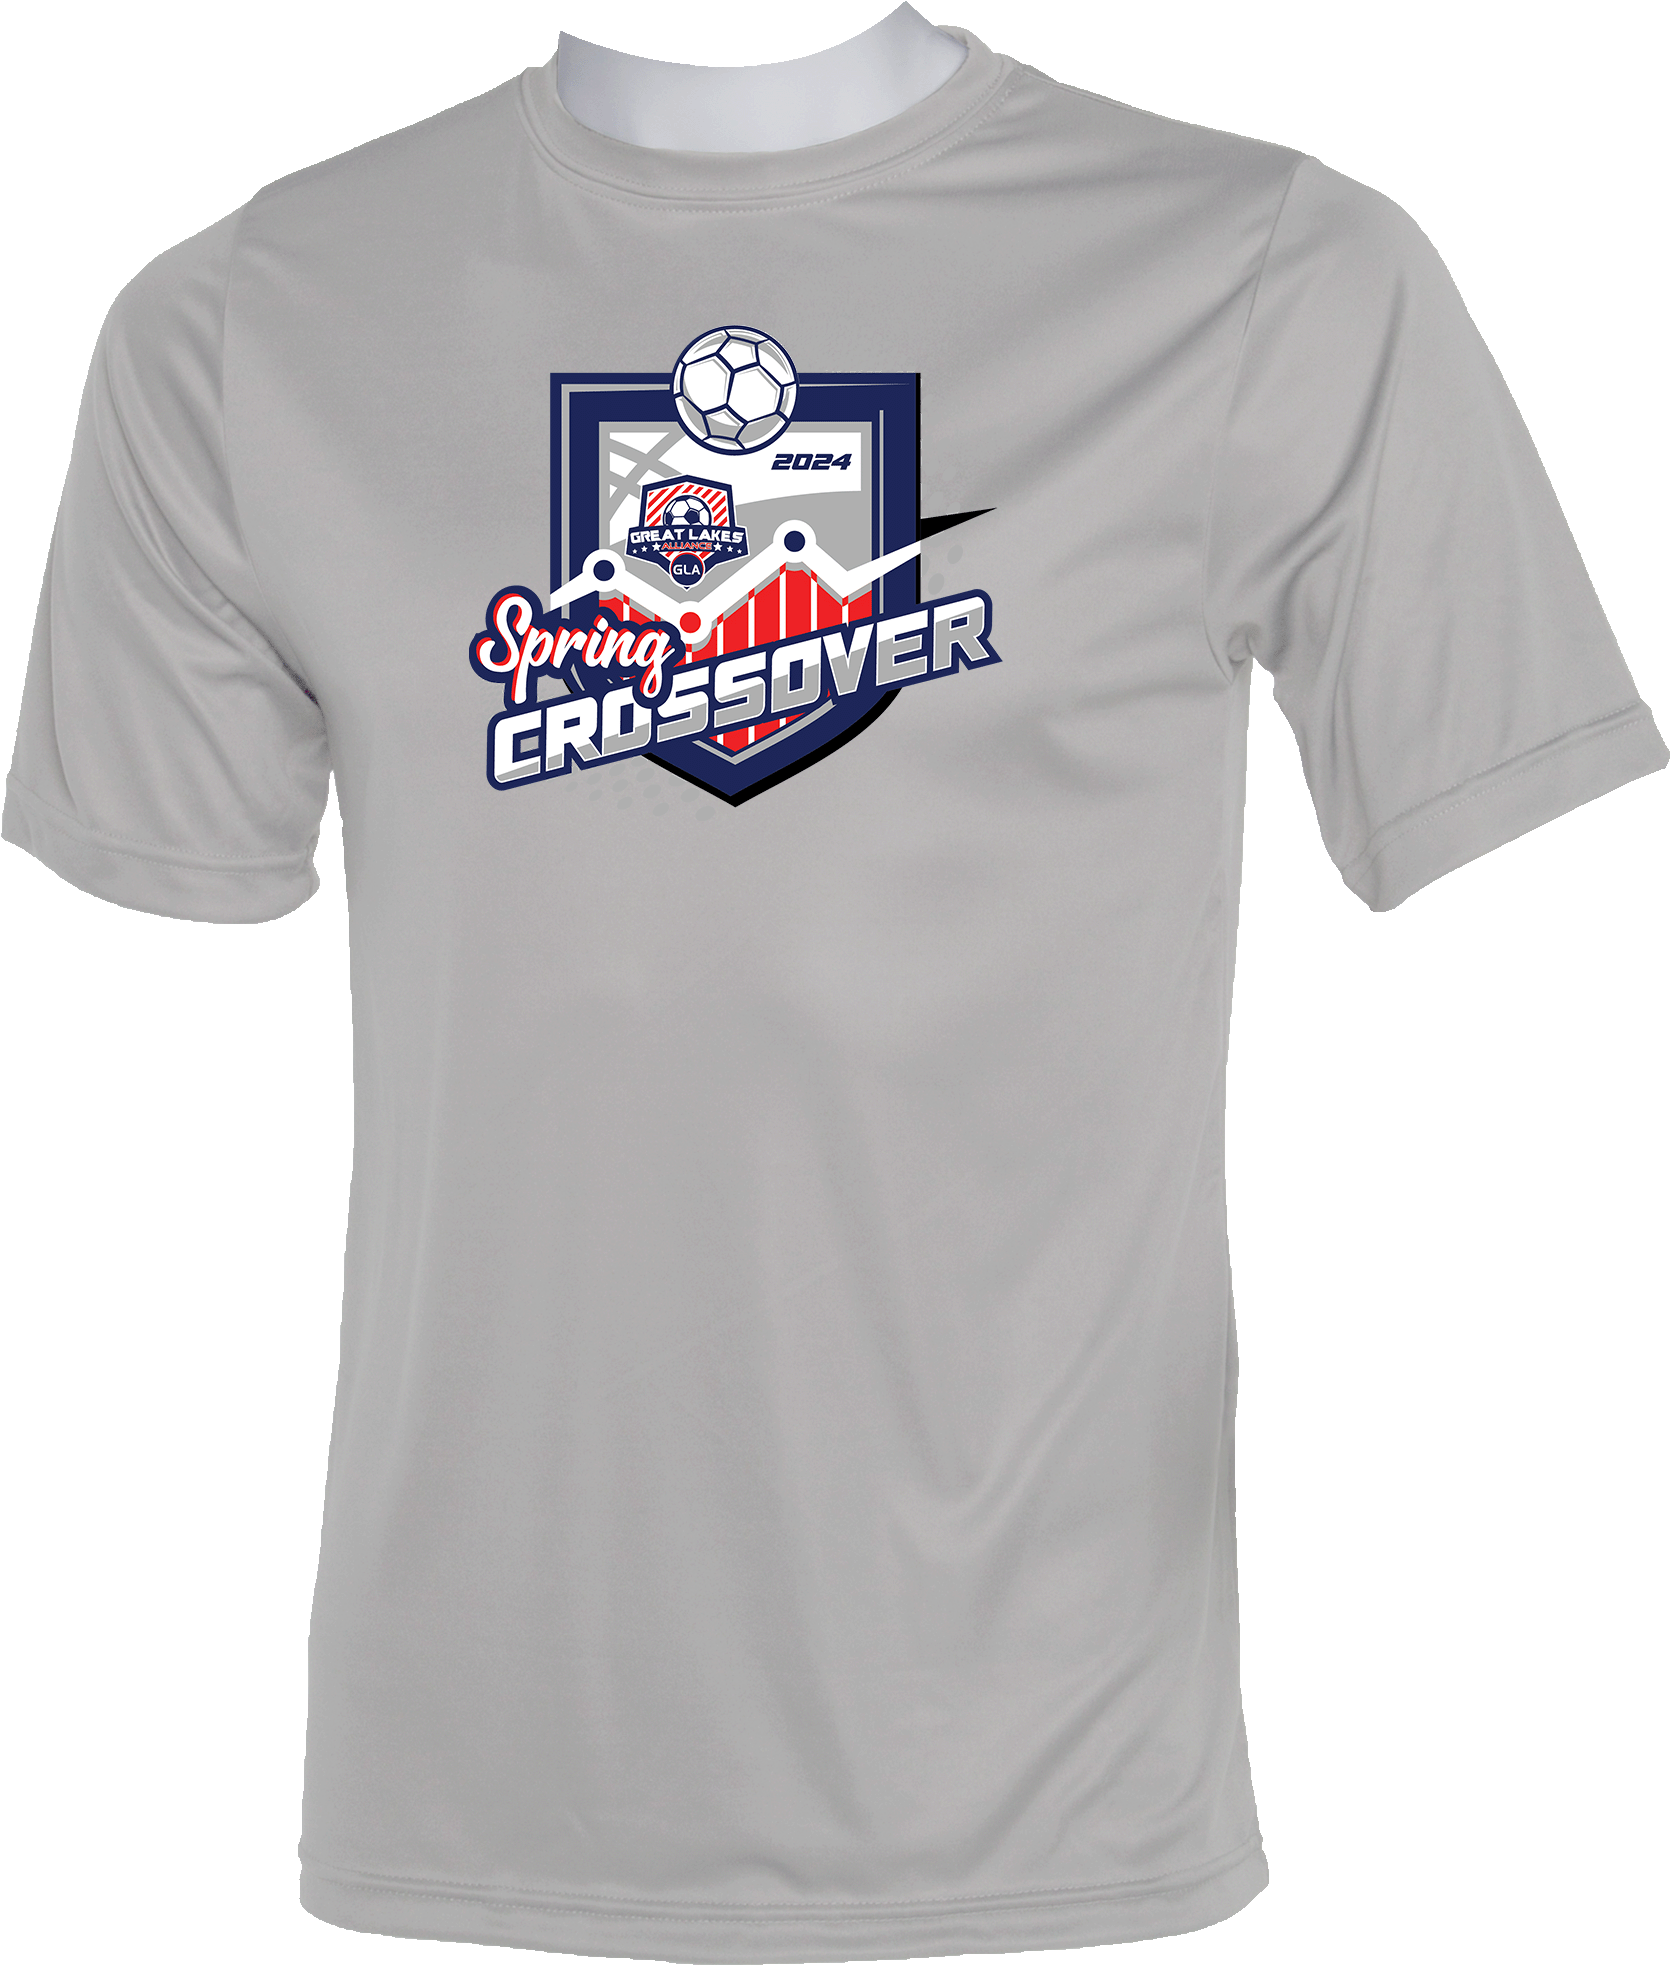 Performance Shirts - 2024 Great Lakes Alliance Spring Crossover